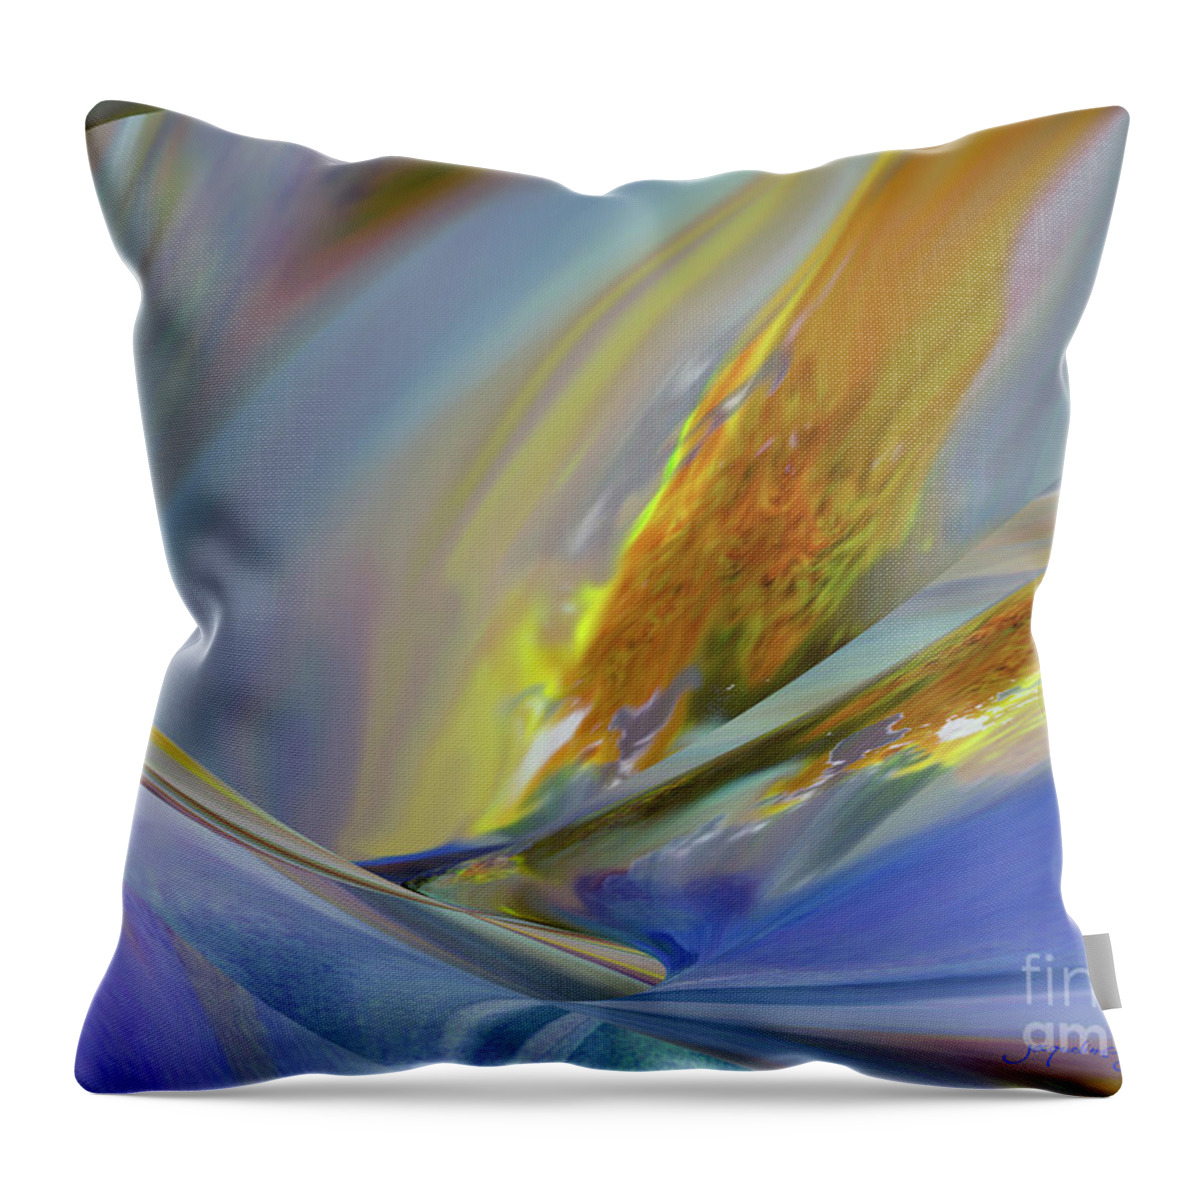 Nlue Throw Pillow featuring the mixed media Inspiration by Jacqueline Shuler